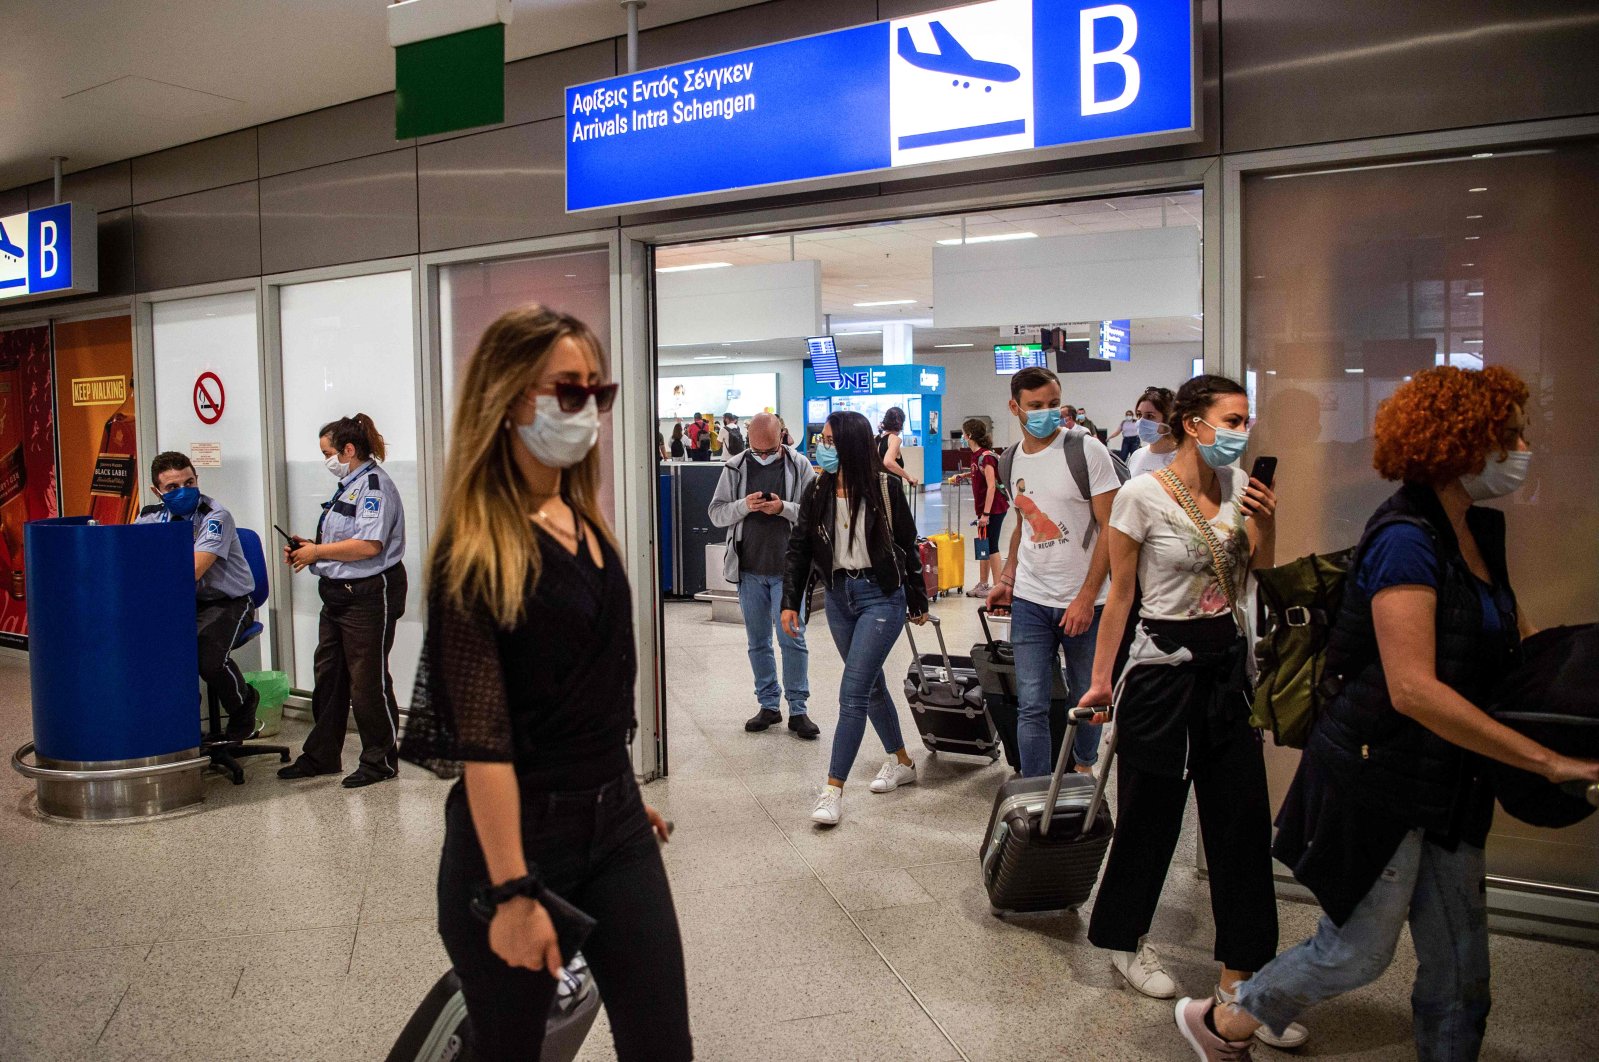 Passengers of a flight from Paris wearing protective face masks arrive at the Eleftherios Venizelos International Airport in Athens, June 15, 2020. (AFP Photo)